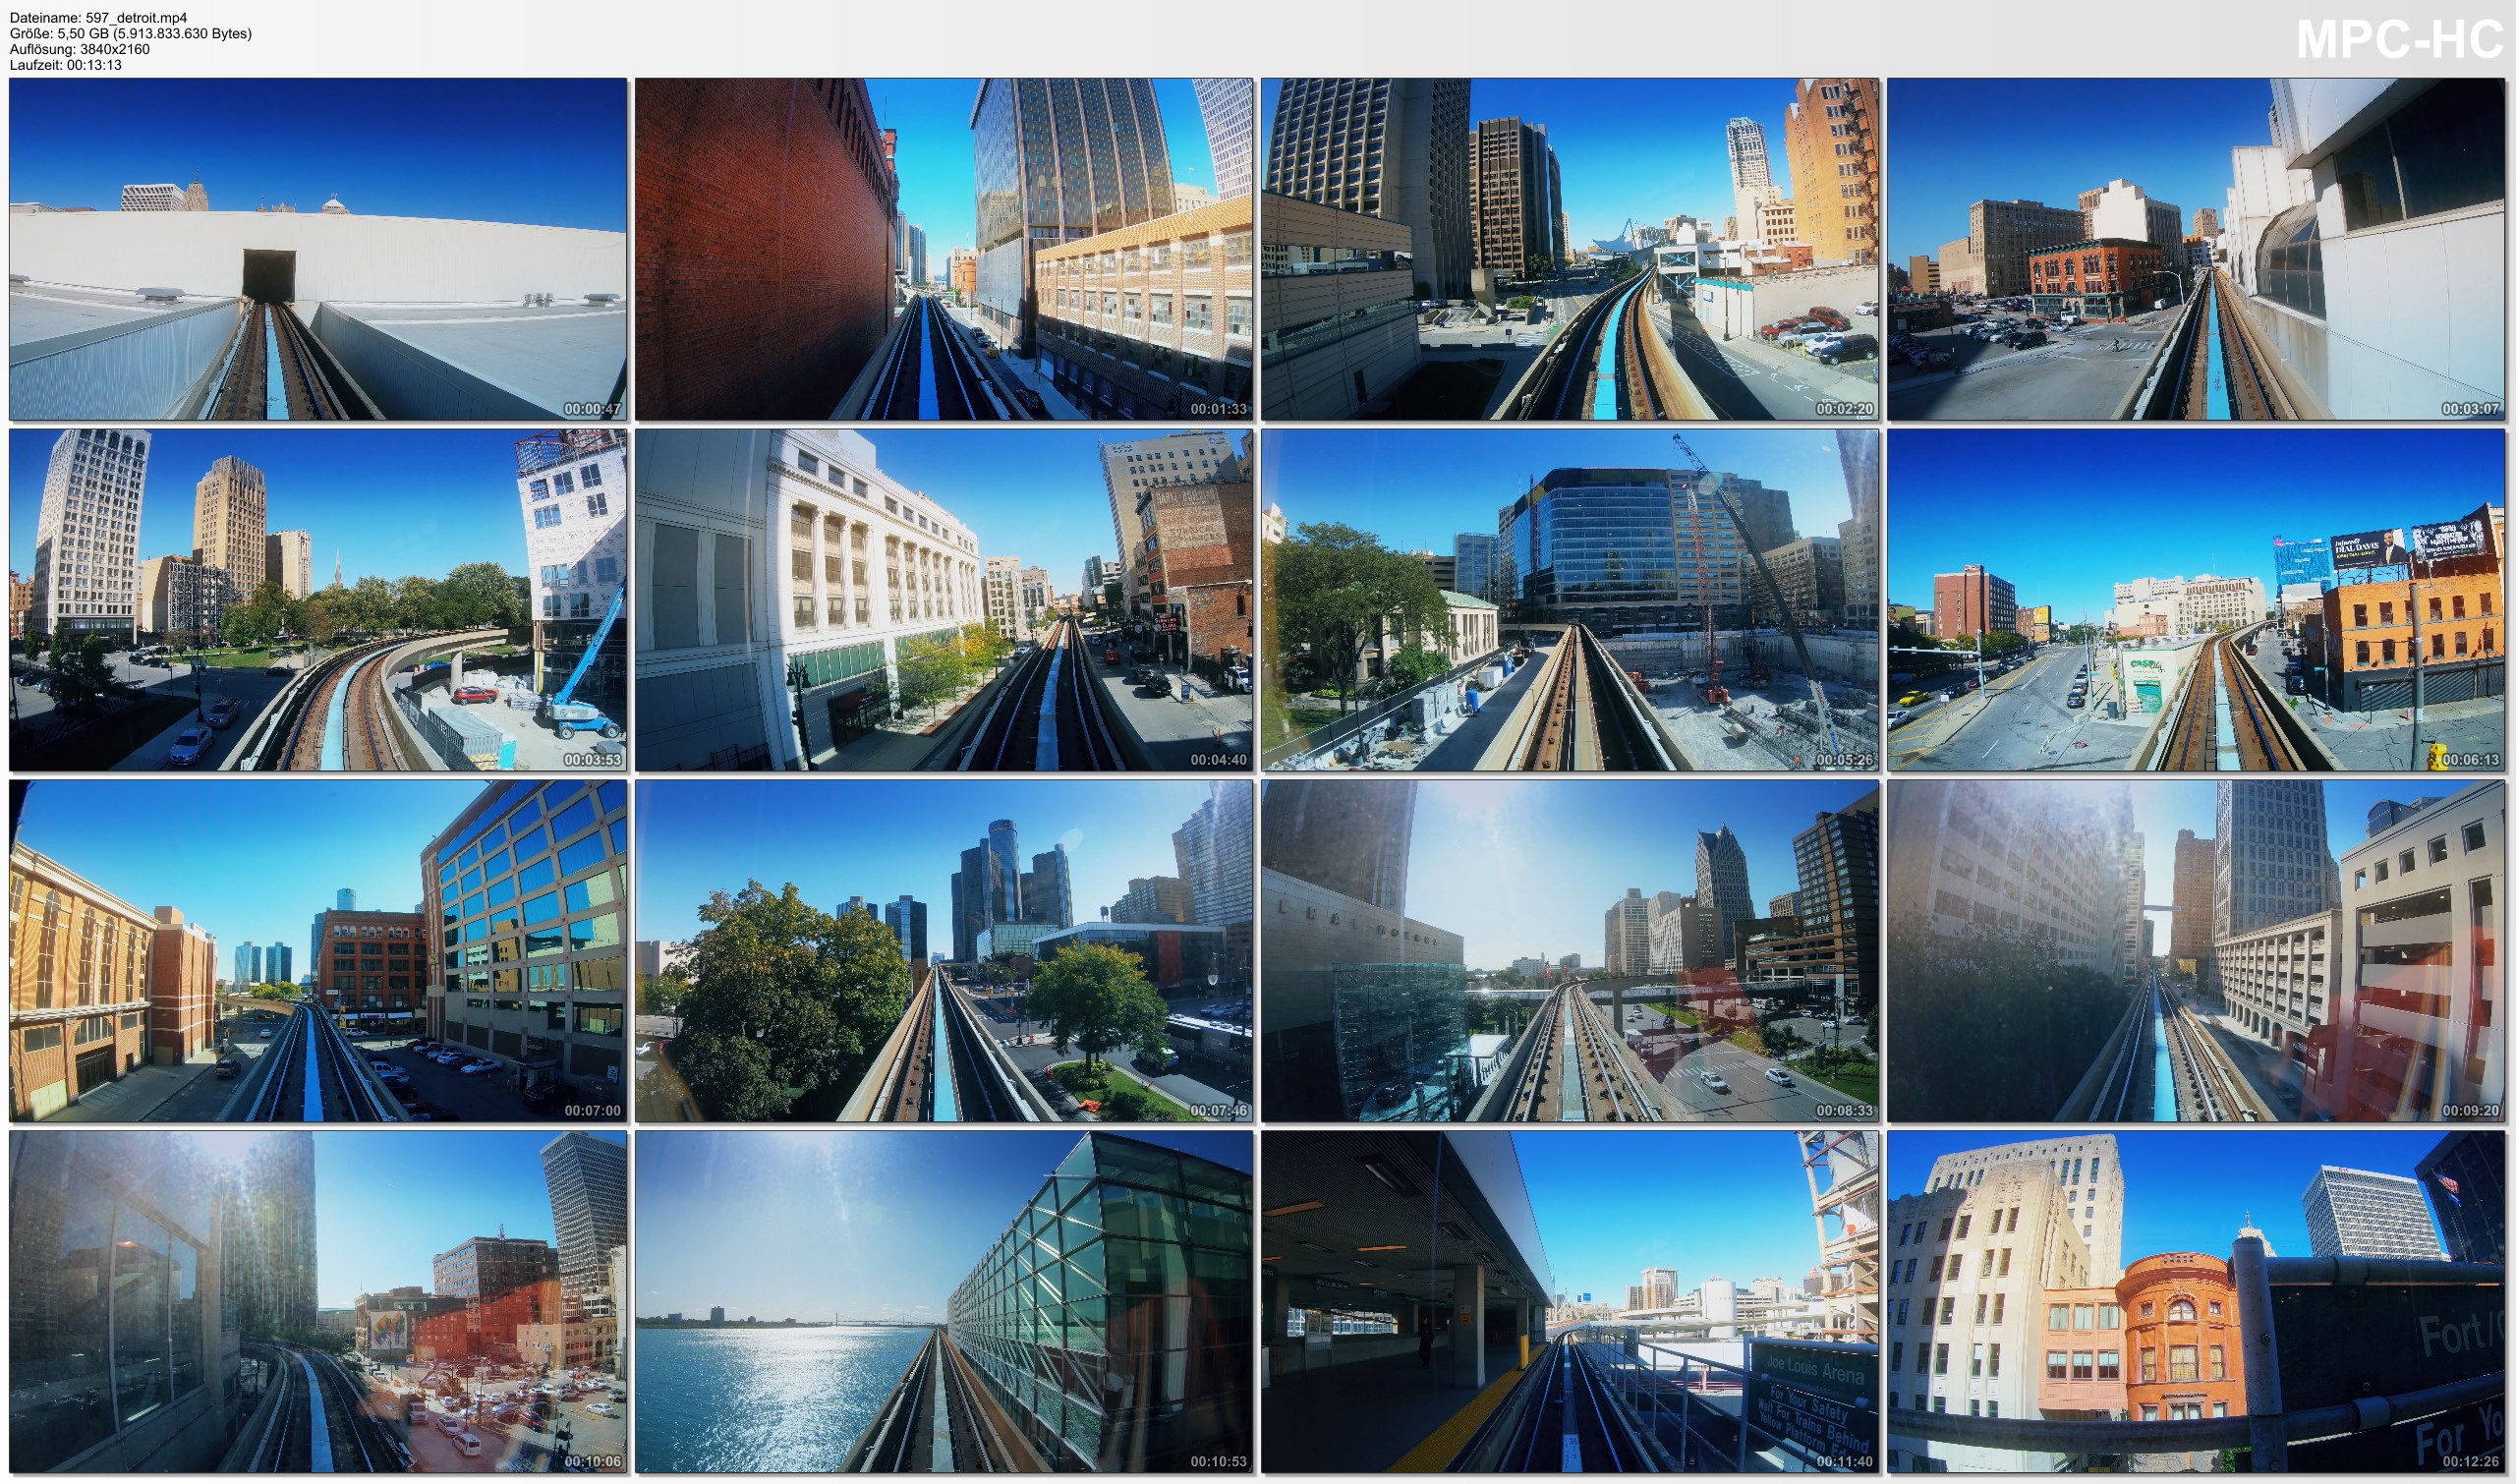  Pictures from Video 【4K】Detroit People Mover | Detroit, Michigan 2020 | Full Ride | Cut out Stops | UltraHD Travel Video